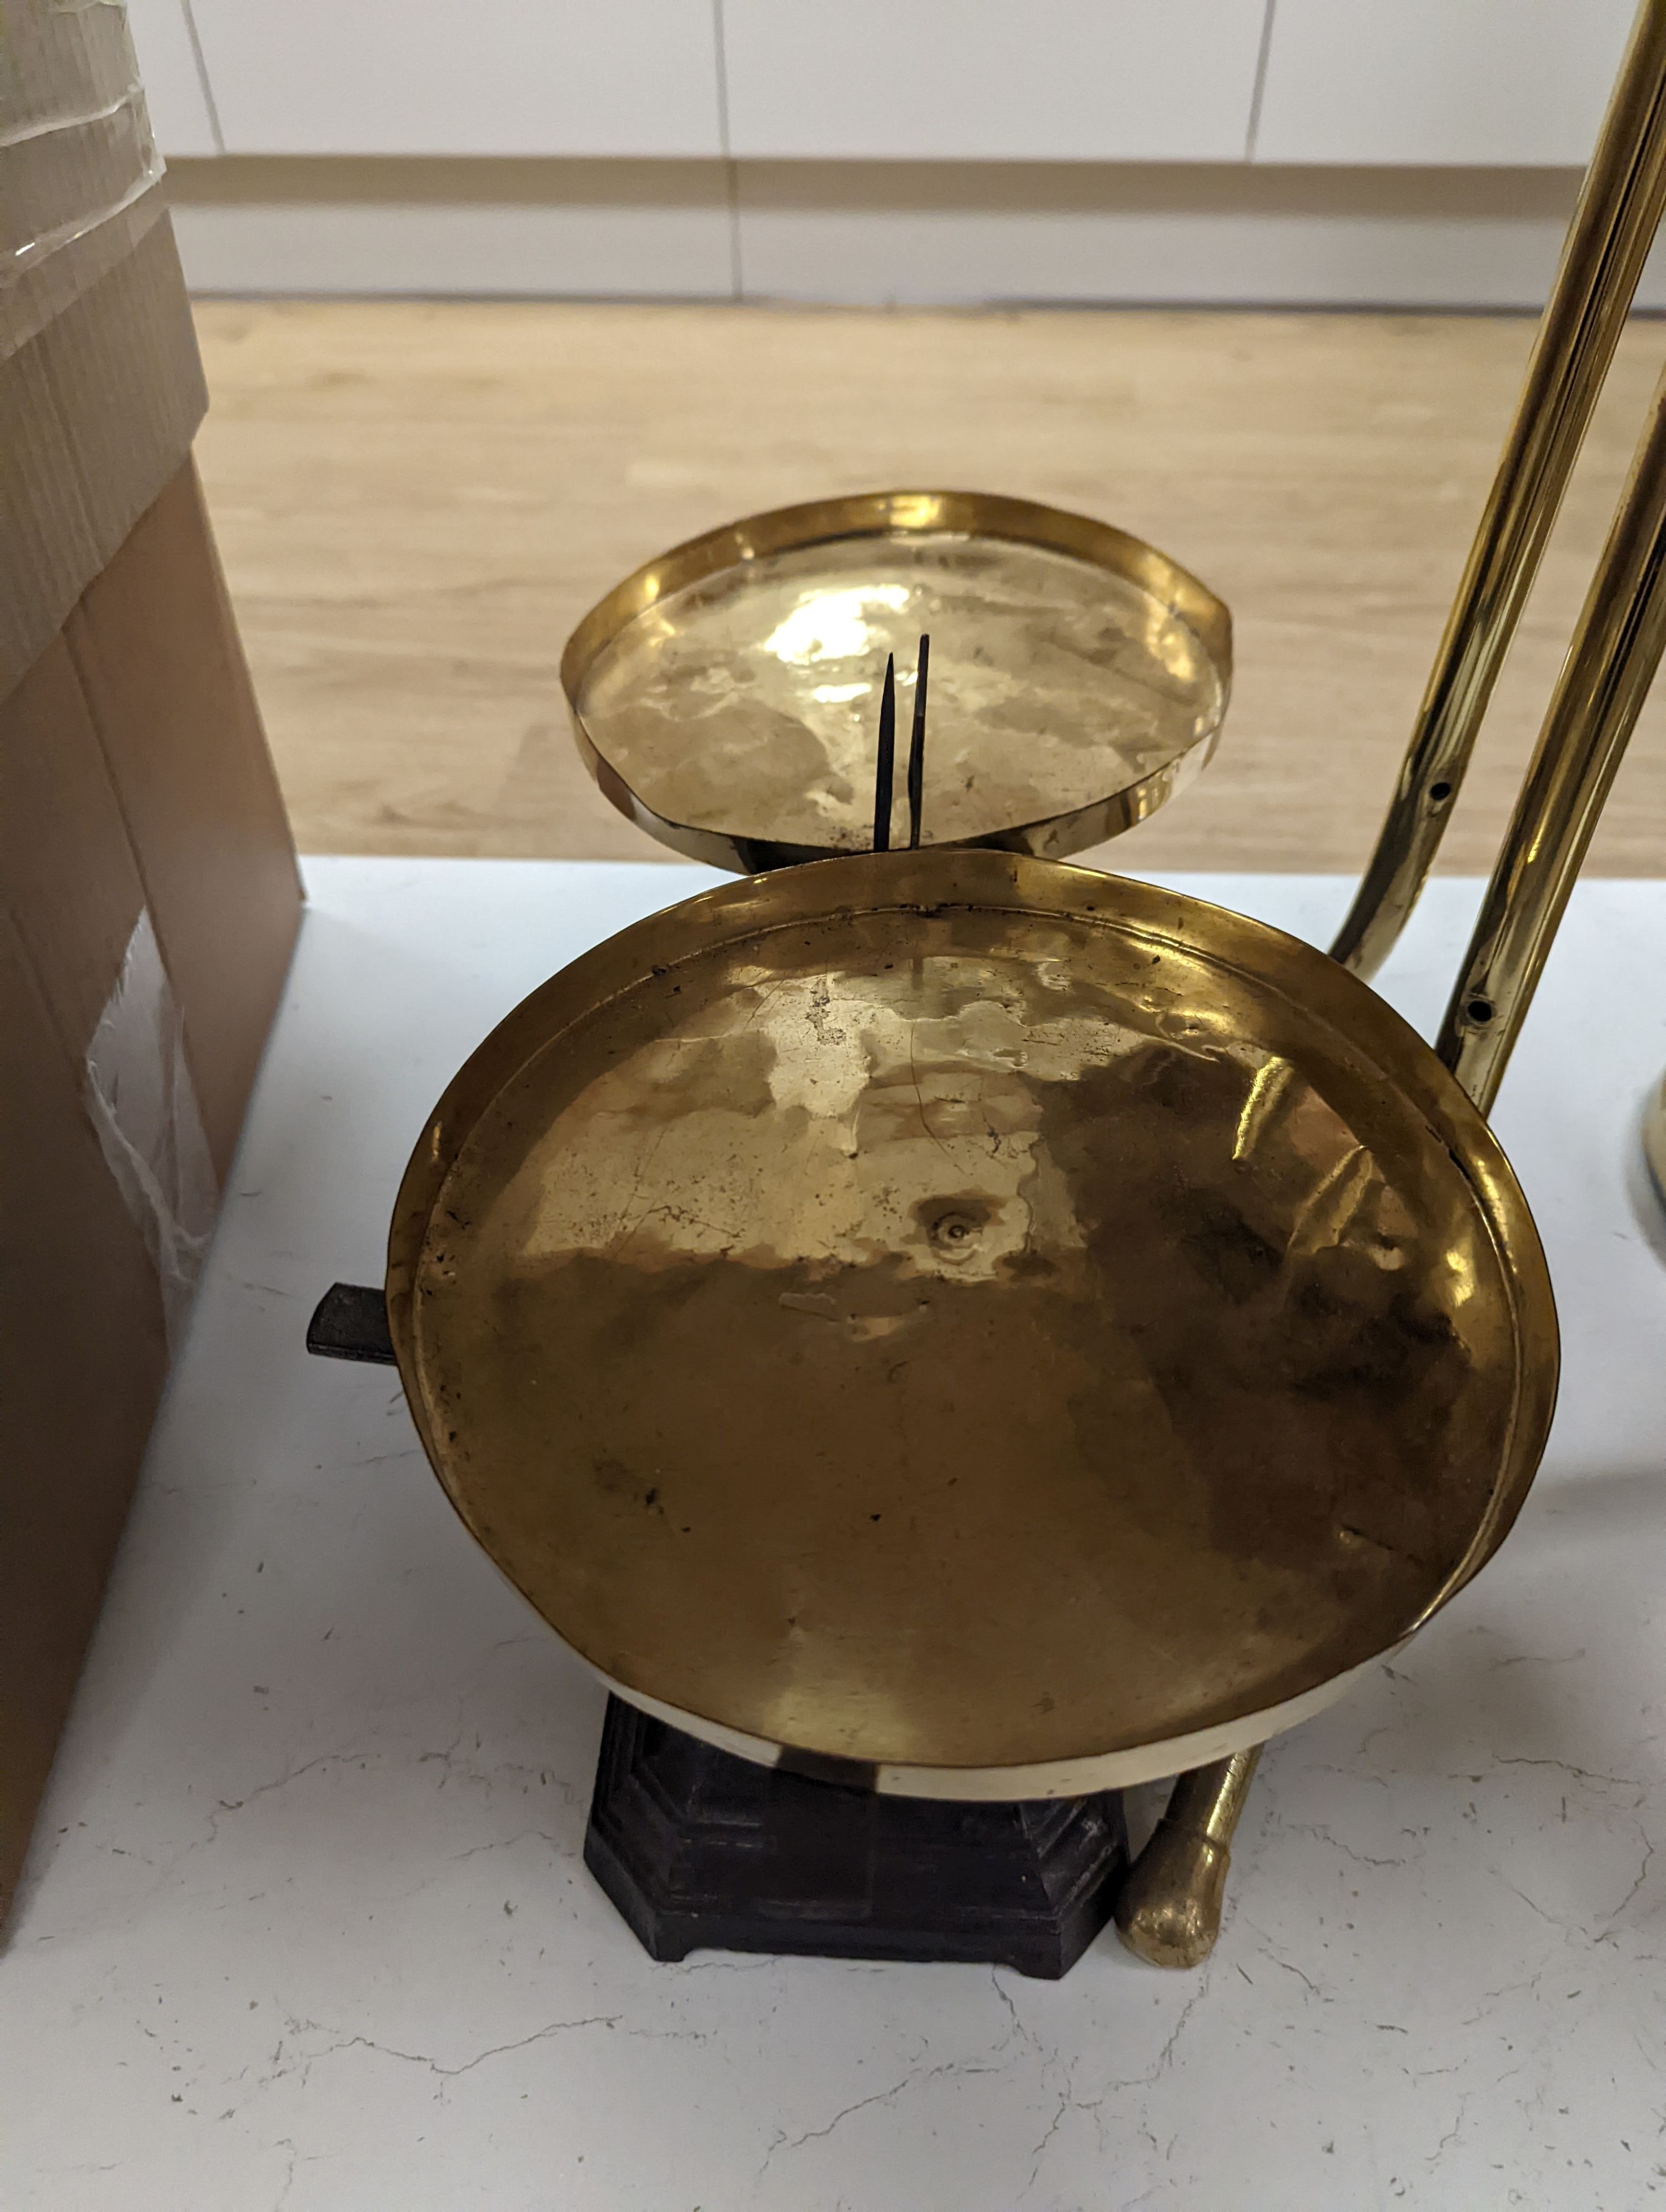 A brass magazine stand, a pair of scales, four candlesticks and a tall brass oil lamp base, Oil lamp 58 cms high.